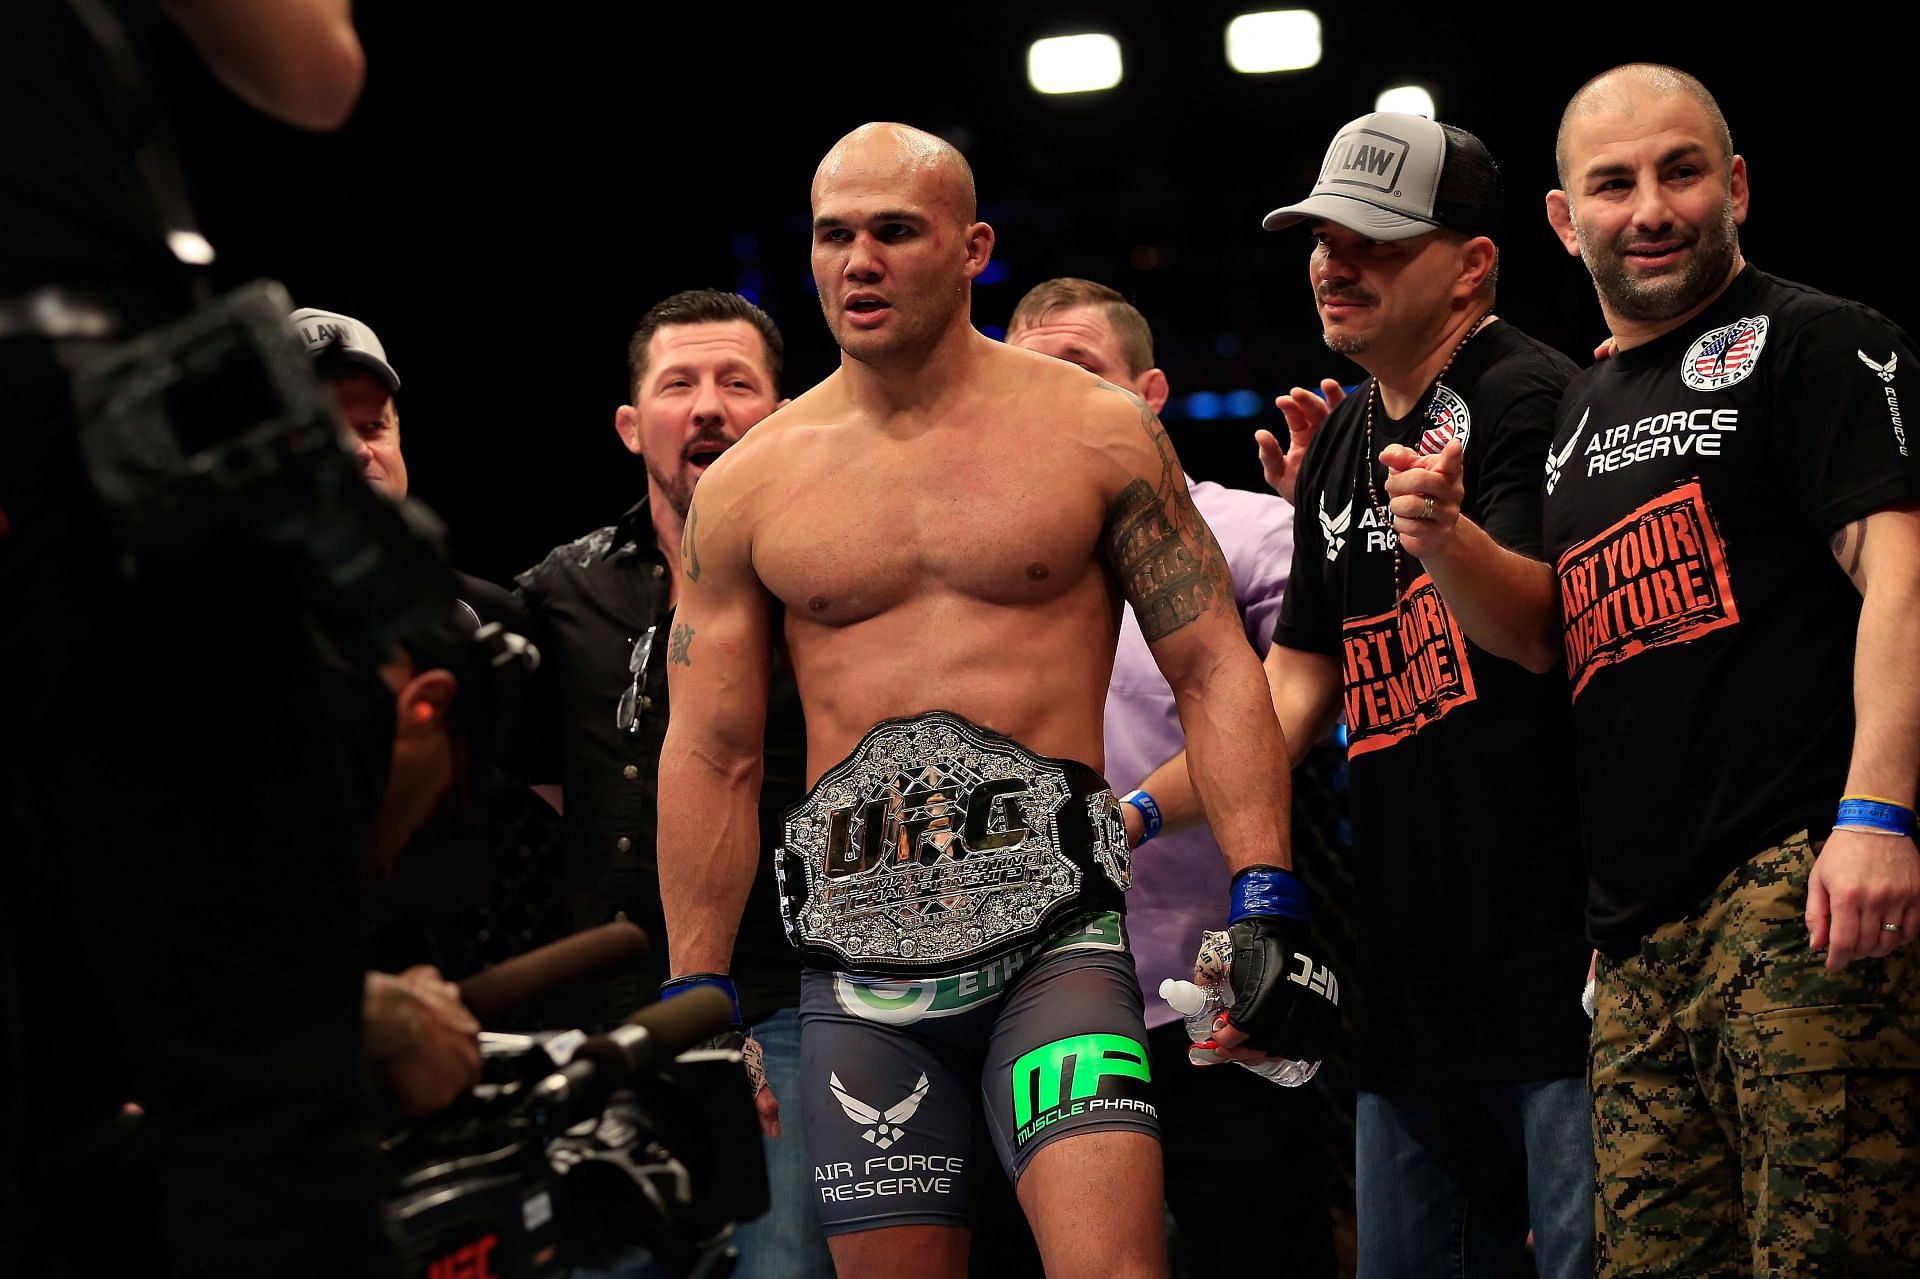 Robbie Lawler was responsible for some of the most exciting title bouts in UFC history